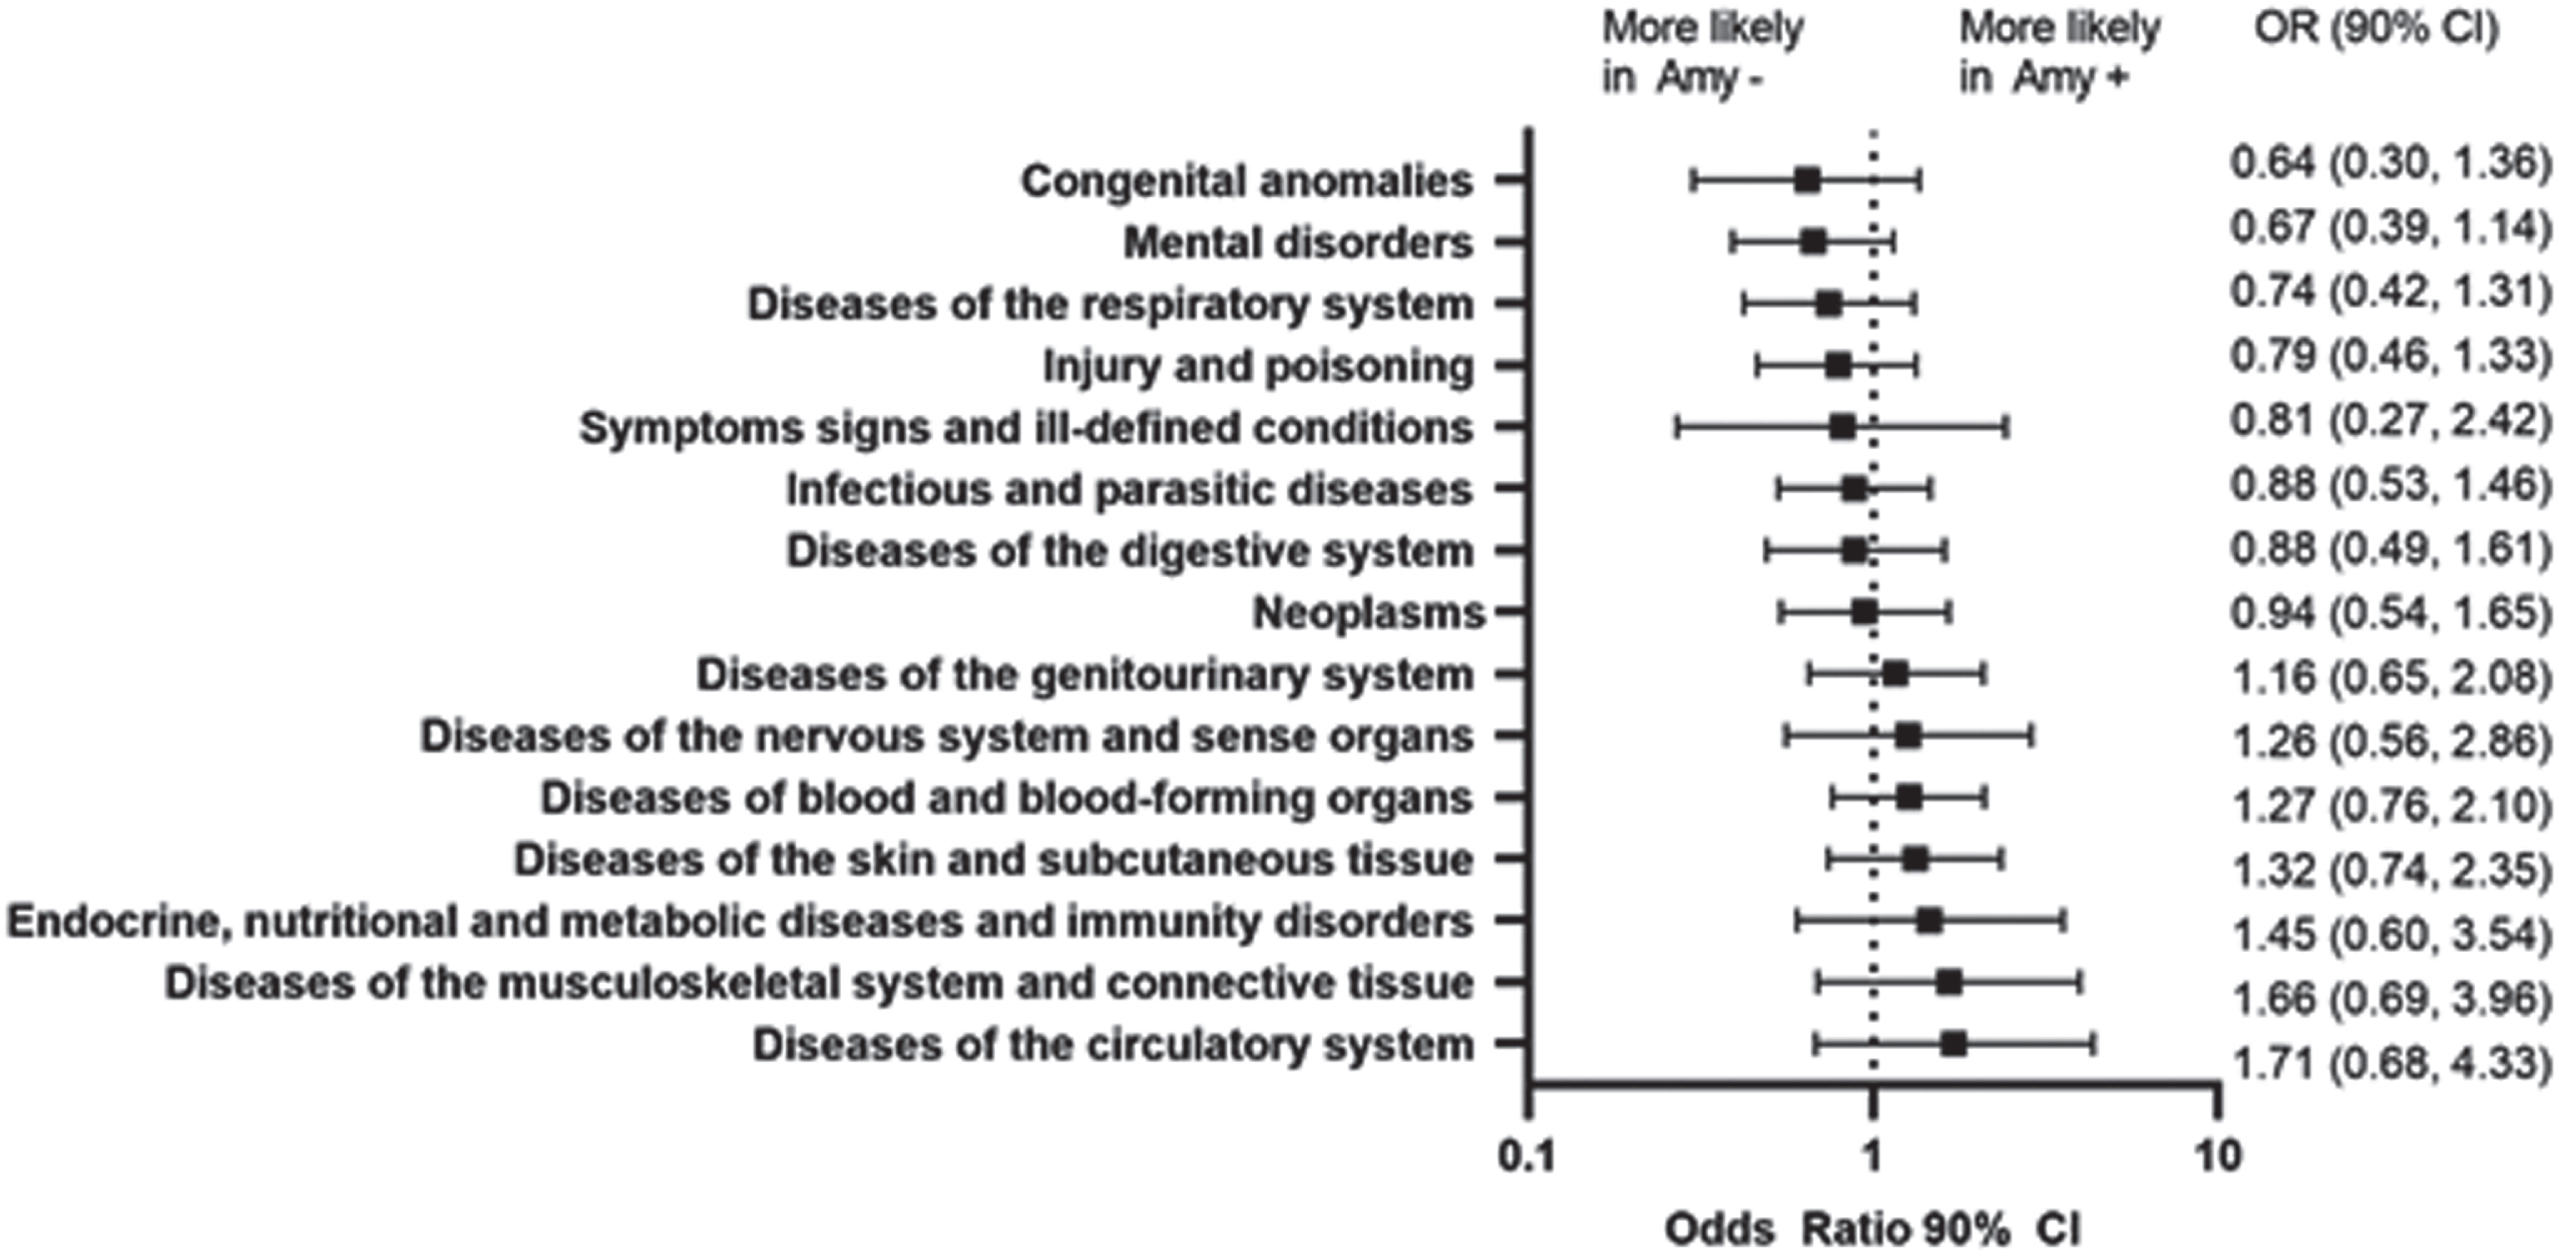 Prevalence of Non-Cognitive impairment/dementia diagnoses prior to study entry and the comparative likelihood by amyloid status. Amy-, amyloid-negative; Amy+, amyloid-positive; CI, confidence interval; OR, odds ratio.